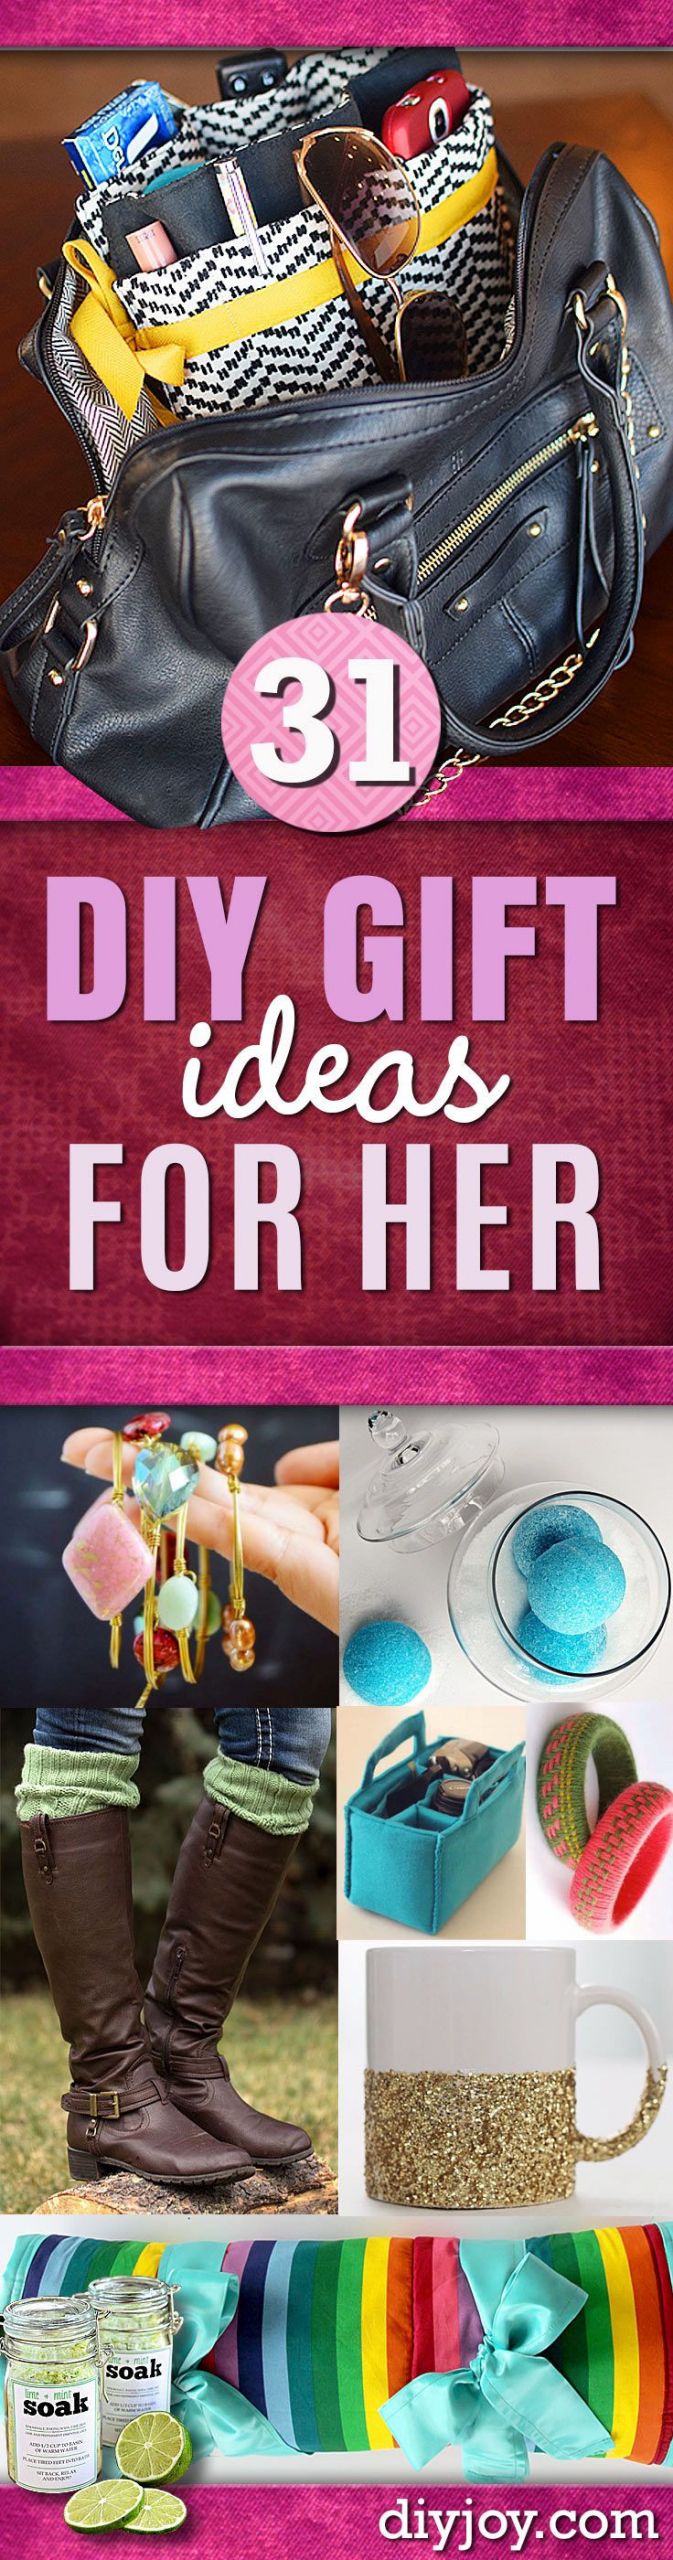 Cheap Gift Ideas For Girlfriend
 Super Special DIY Gift Ideas for Her DIY JOY